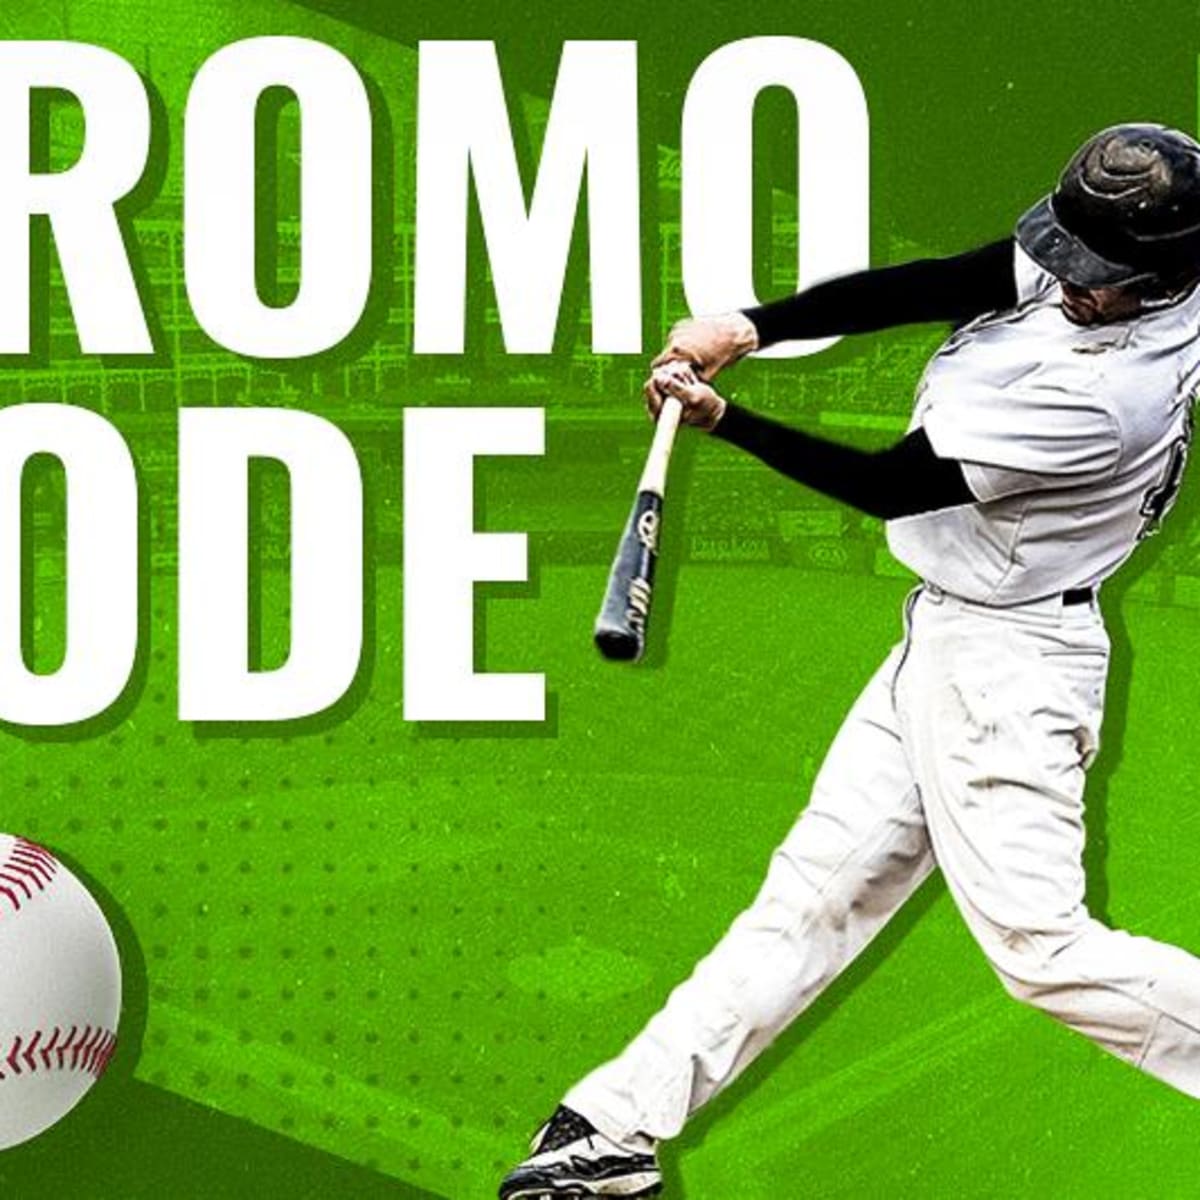 DraftKings promo code World Series: Get $1,050 and $5, win $200 on Game 1 